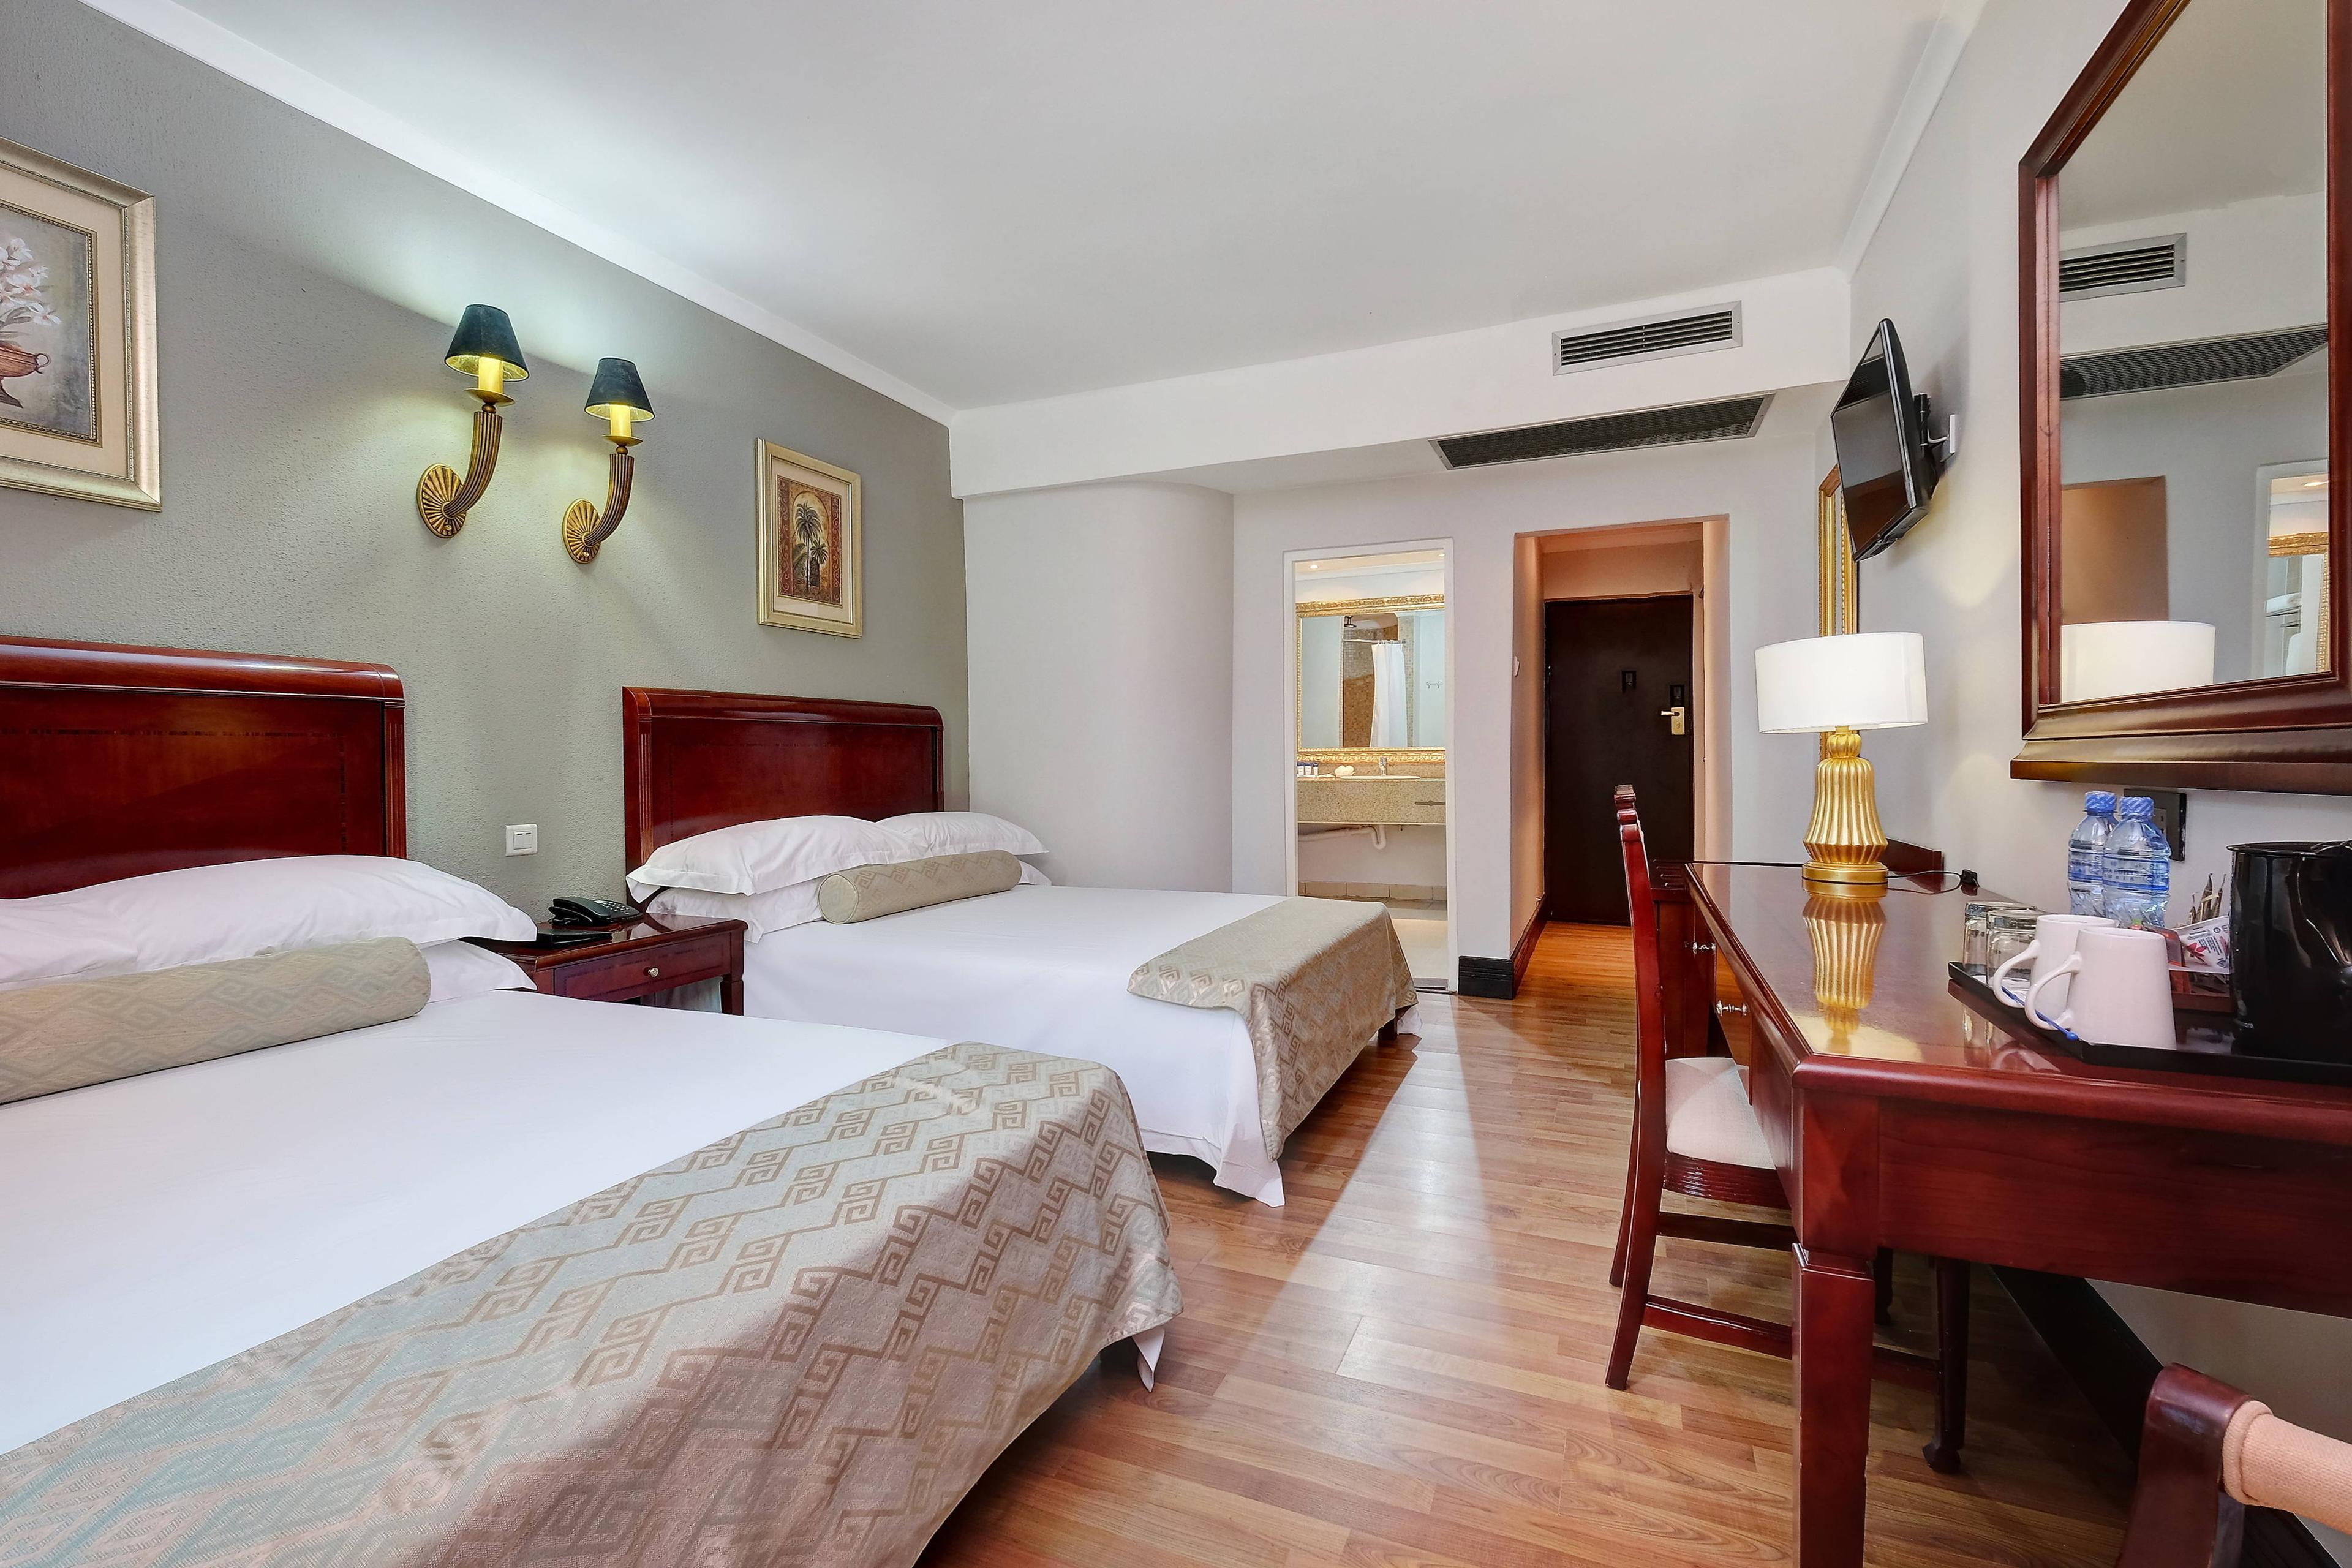 Protea Hotel Livingstone offers 40 deluxe guest rooms with two queen beds, a work desk and a wall-mounted flat-screen TV.